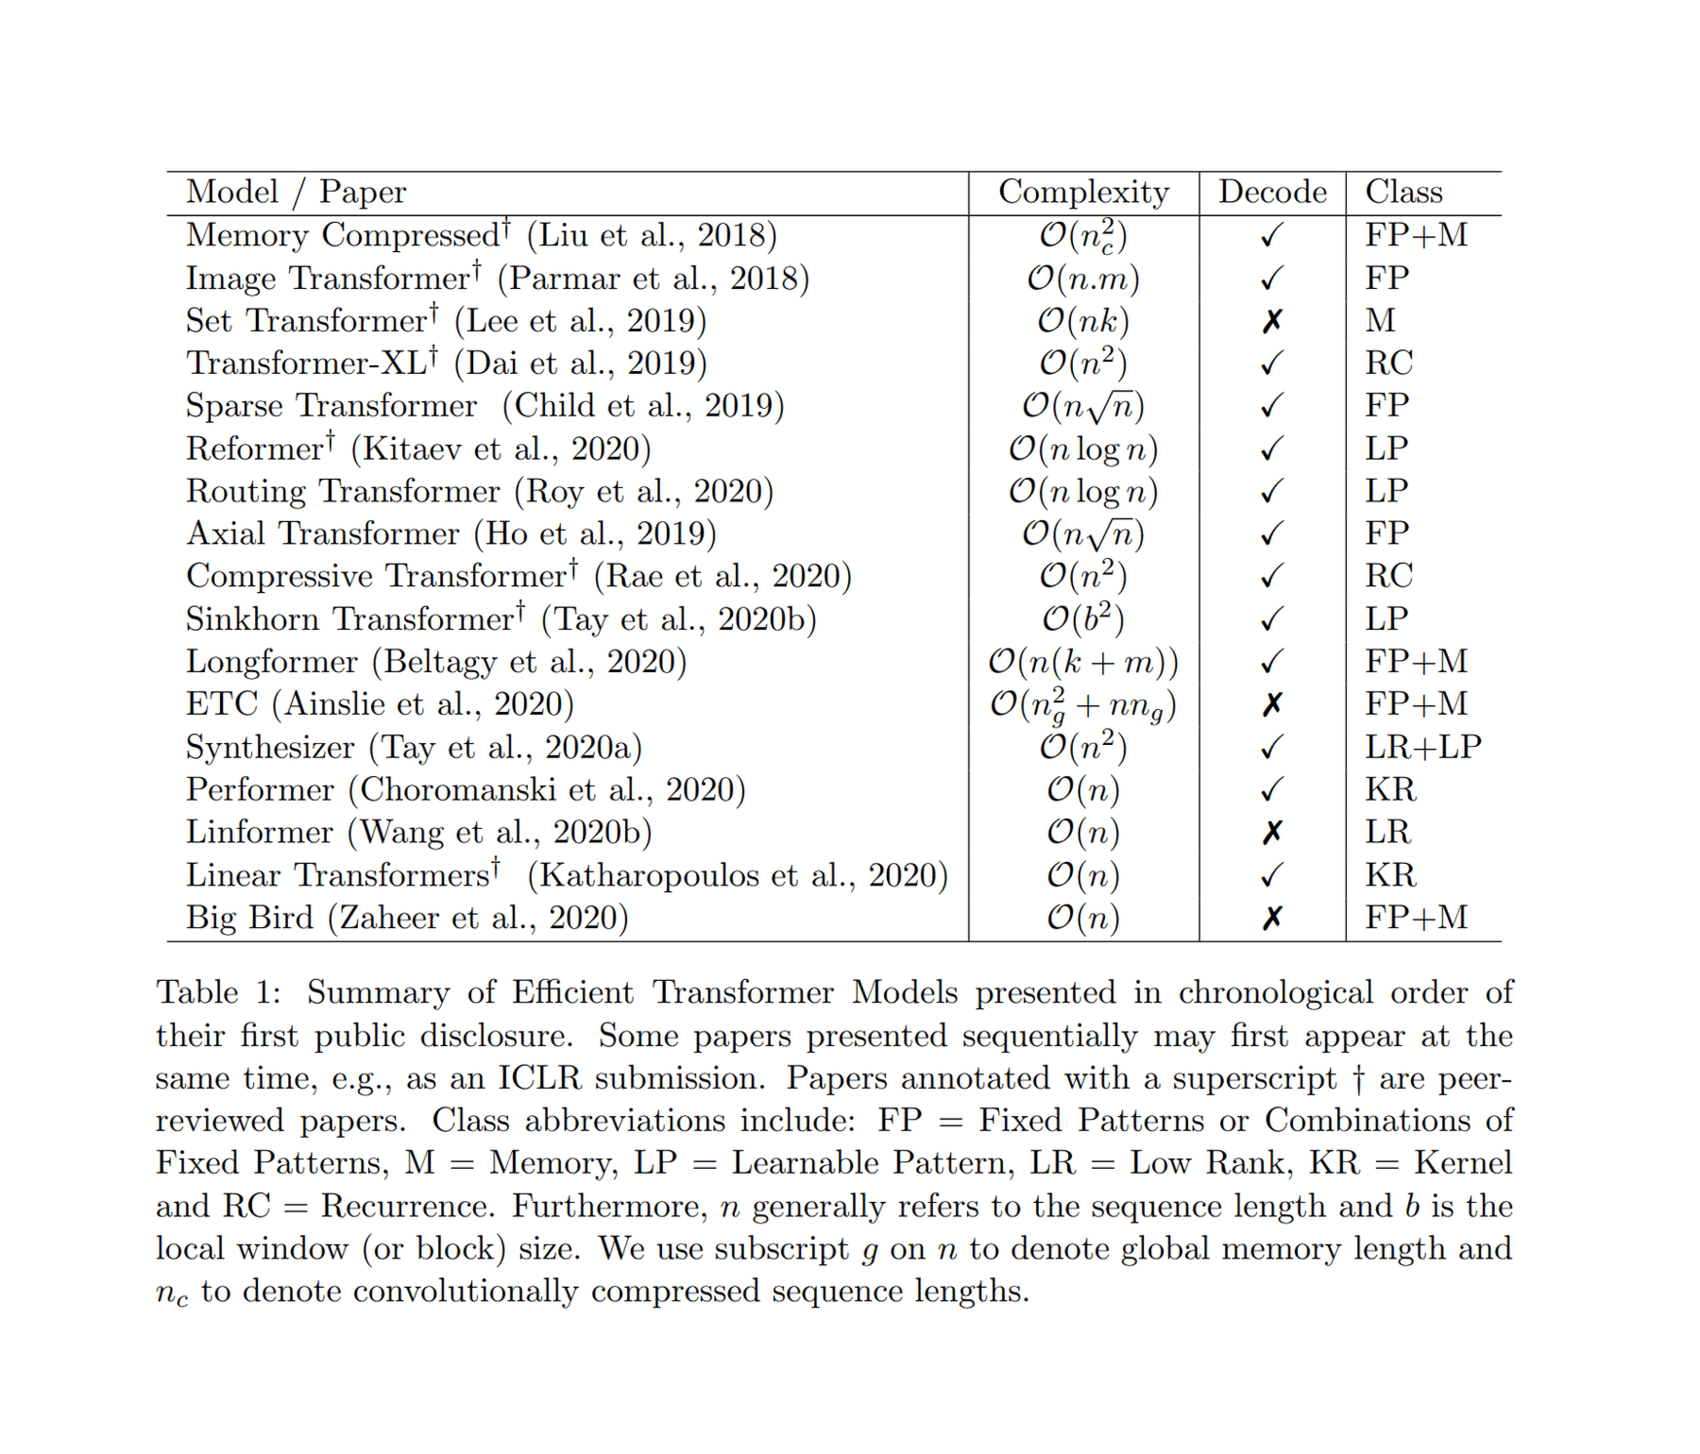 Table 1: Summary of Efficient Transformer Models presented in chronological order of their first public disclosure (Tay et al 2020)